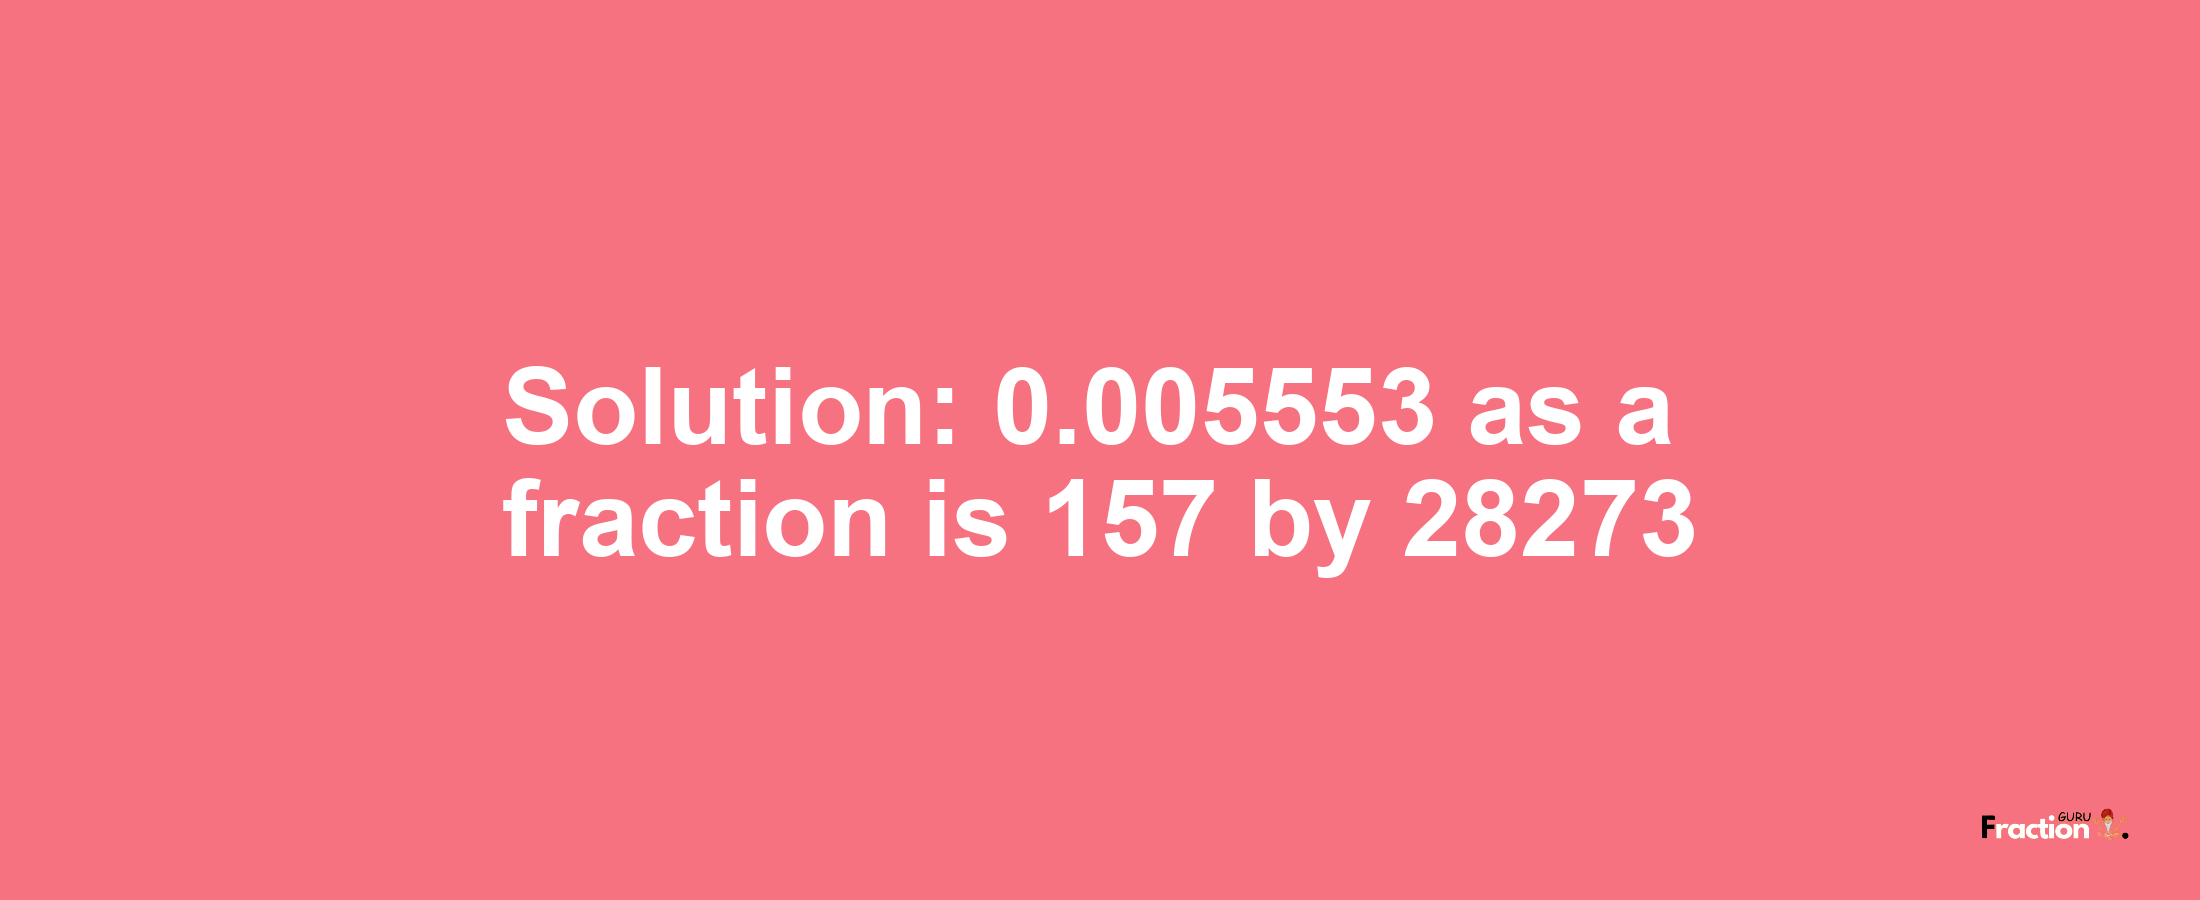 Solution:0.005553 as a fraction is 157/28273